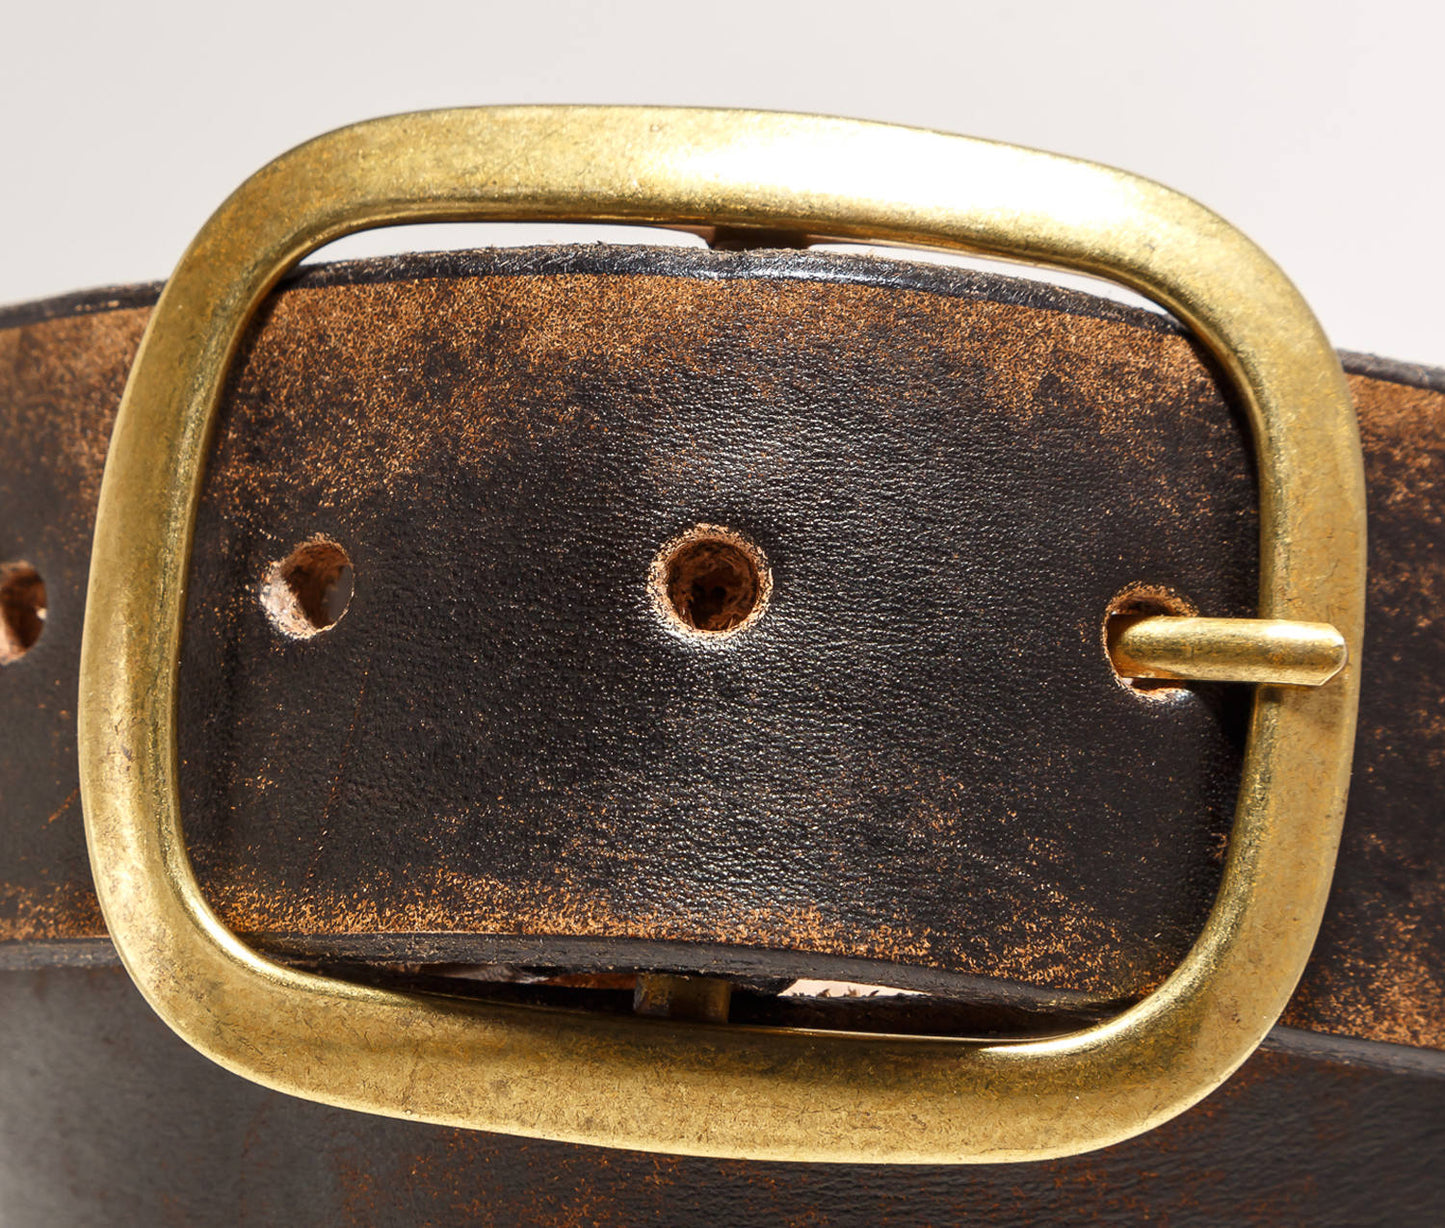 Distressed Light Blue Leather Belt with Antique Brass or Silver Buckle